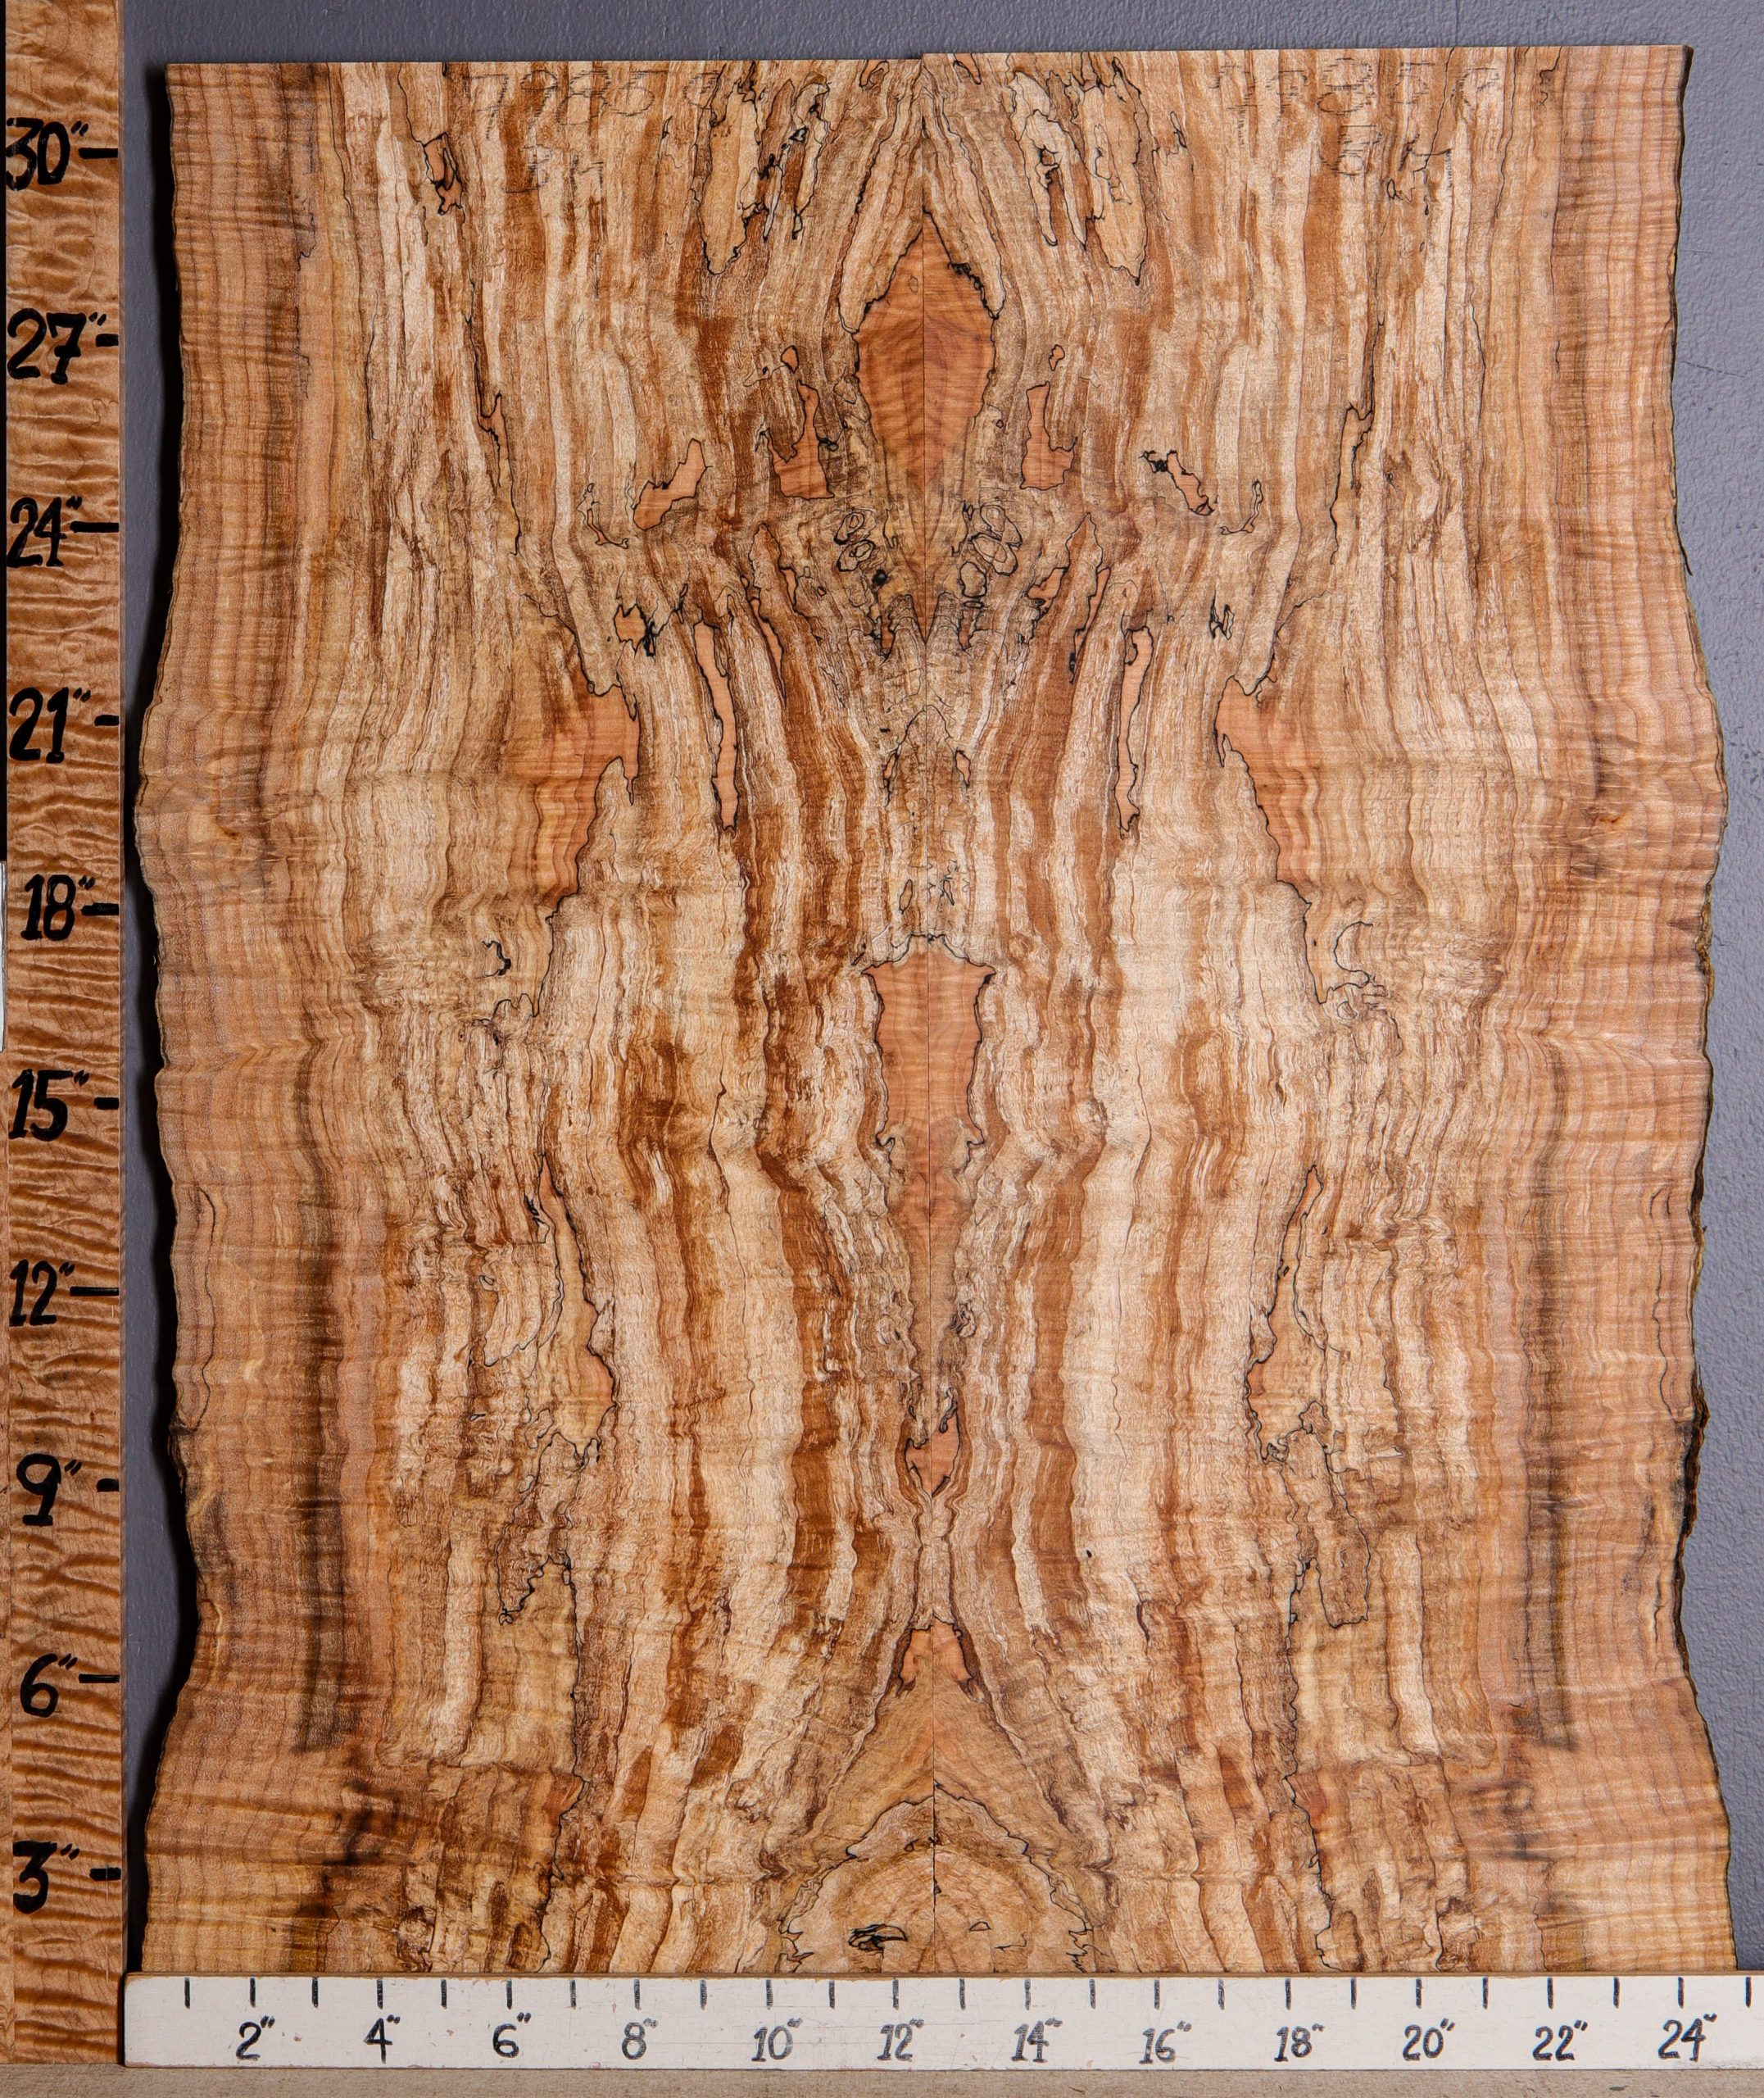 5A Spalted Curly Maple Microlumber Bookmatch with Live Edge 23